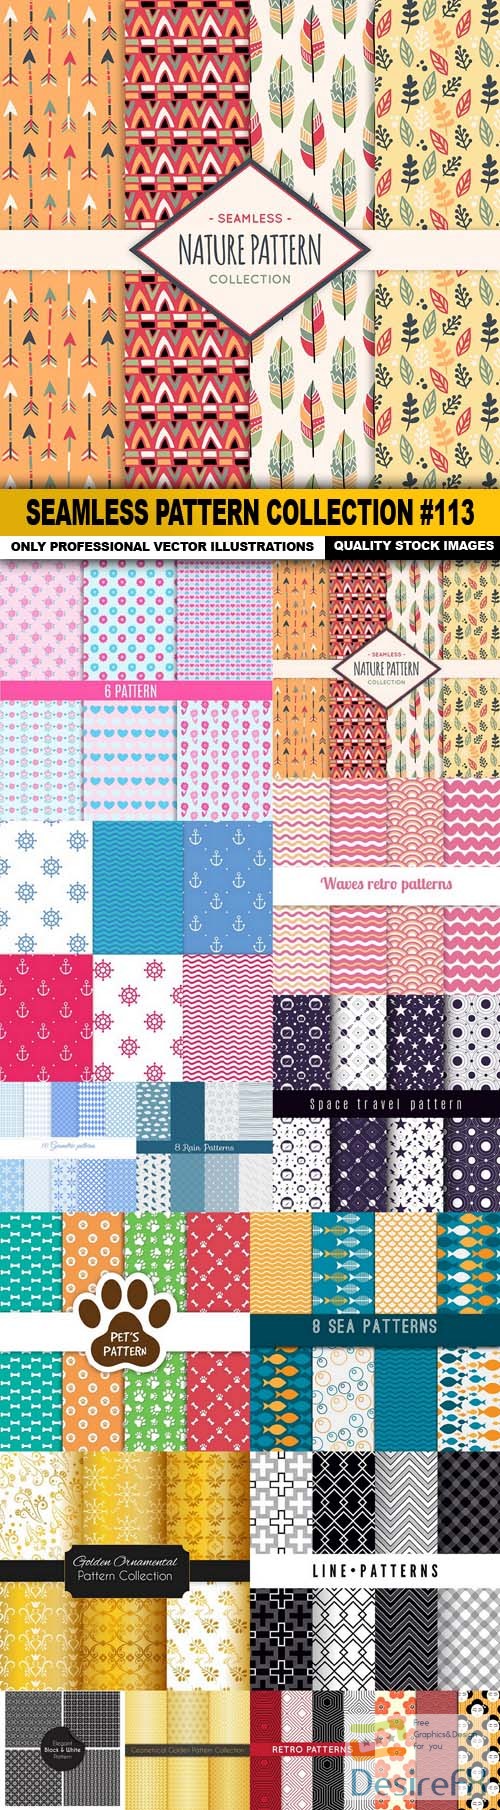 Seamless Pattern Collection #113 - 15 Vector